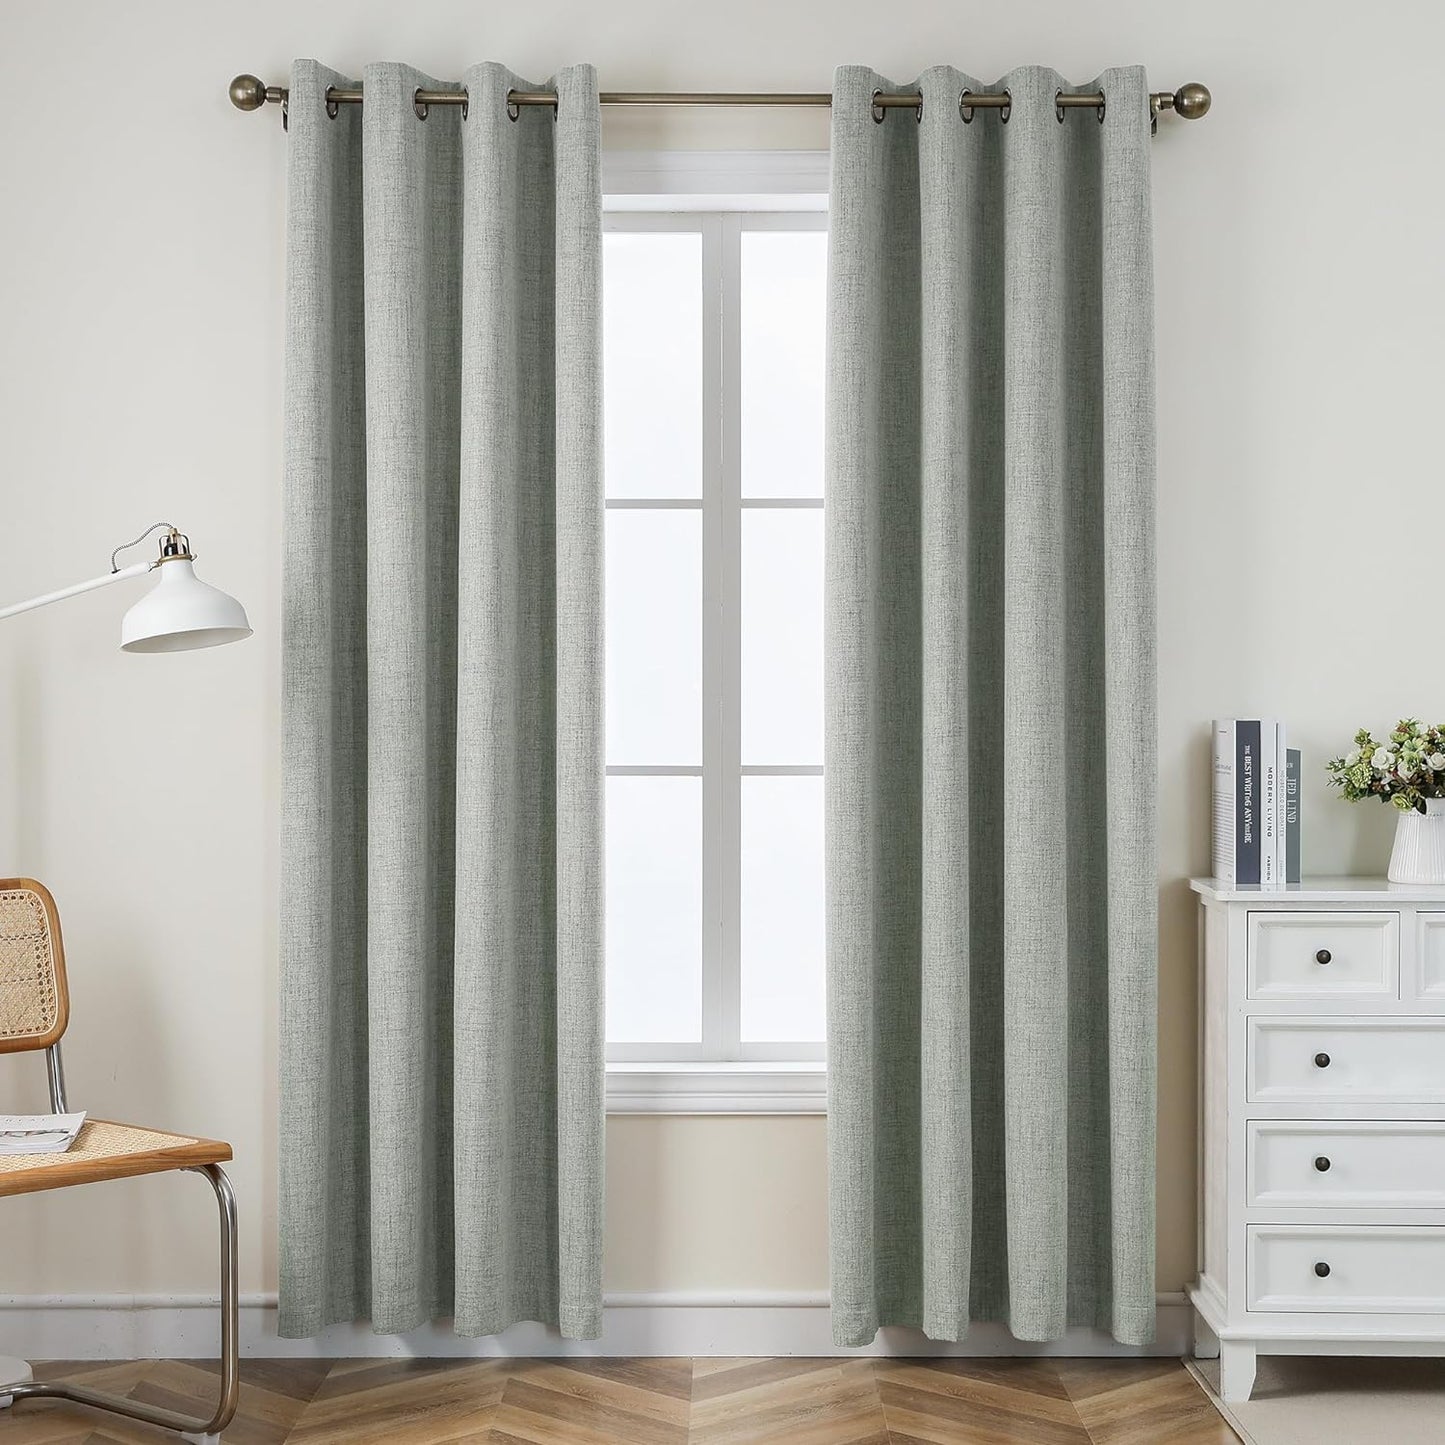 CUCRAF Full Blackout Window Curtains 84 Inches Long,Faux Linen Look Thermal Insulated Grommet Drapes Panels for Bedroom Living Room,Set of 2(52 X 84 Inches, Light Khaki)  CUCRAF Grey Green 52 X 108 Inches 